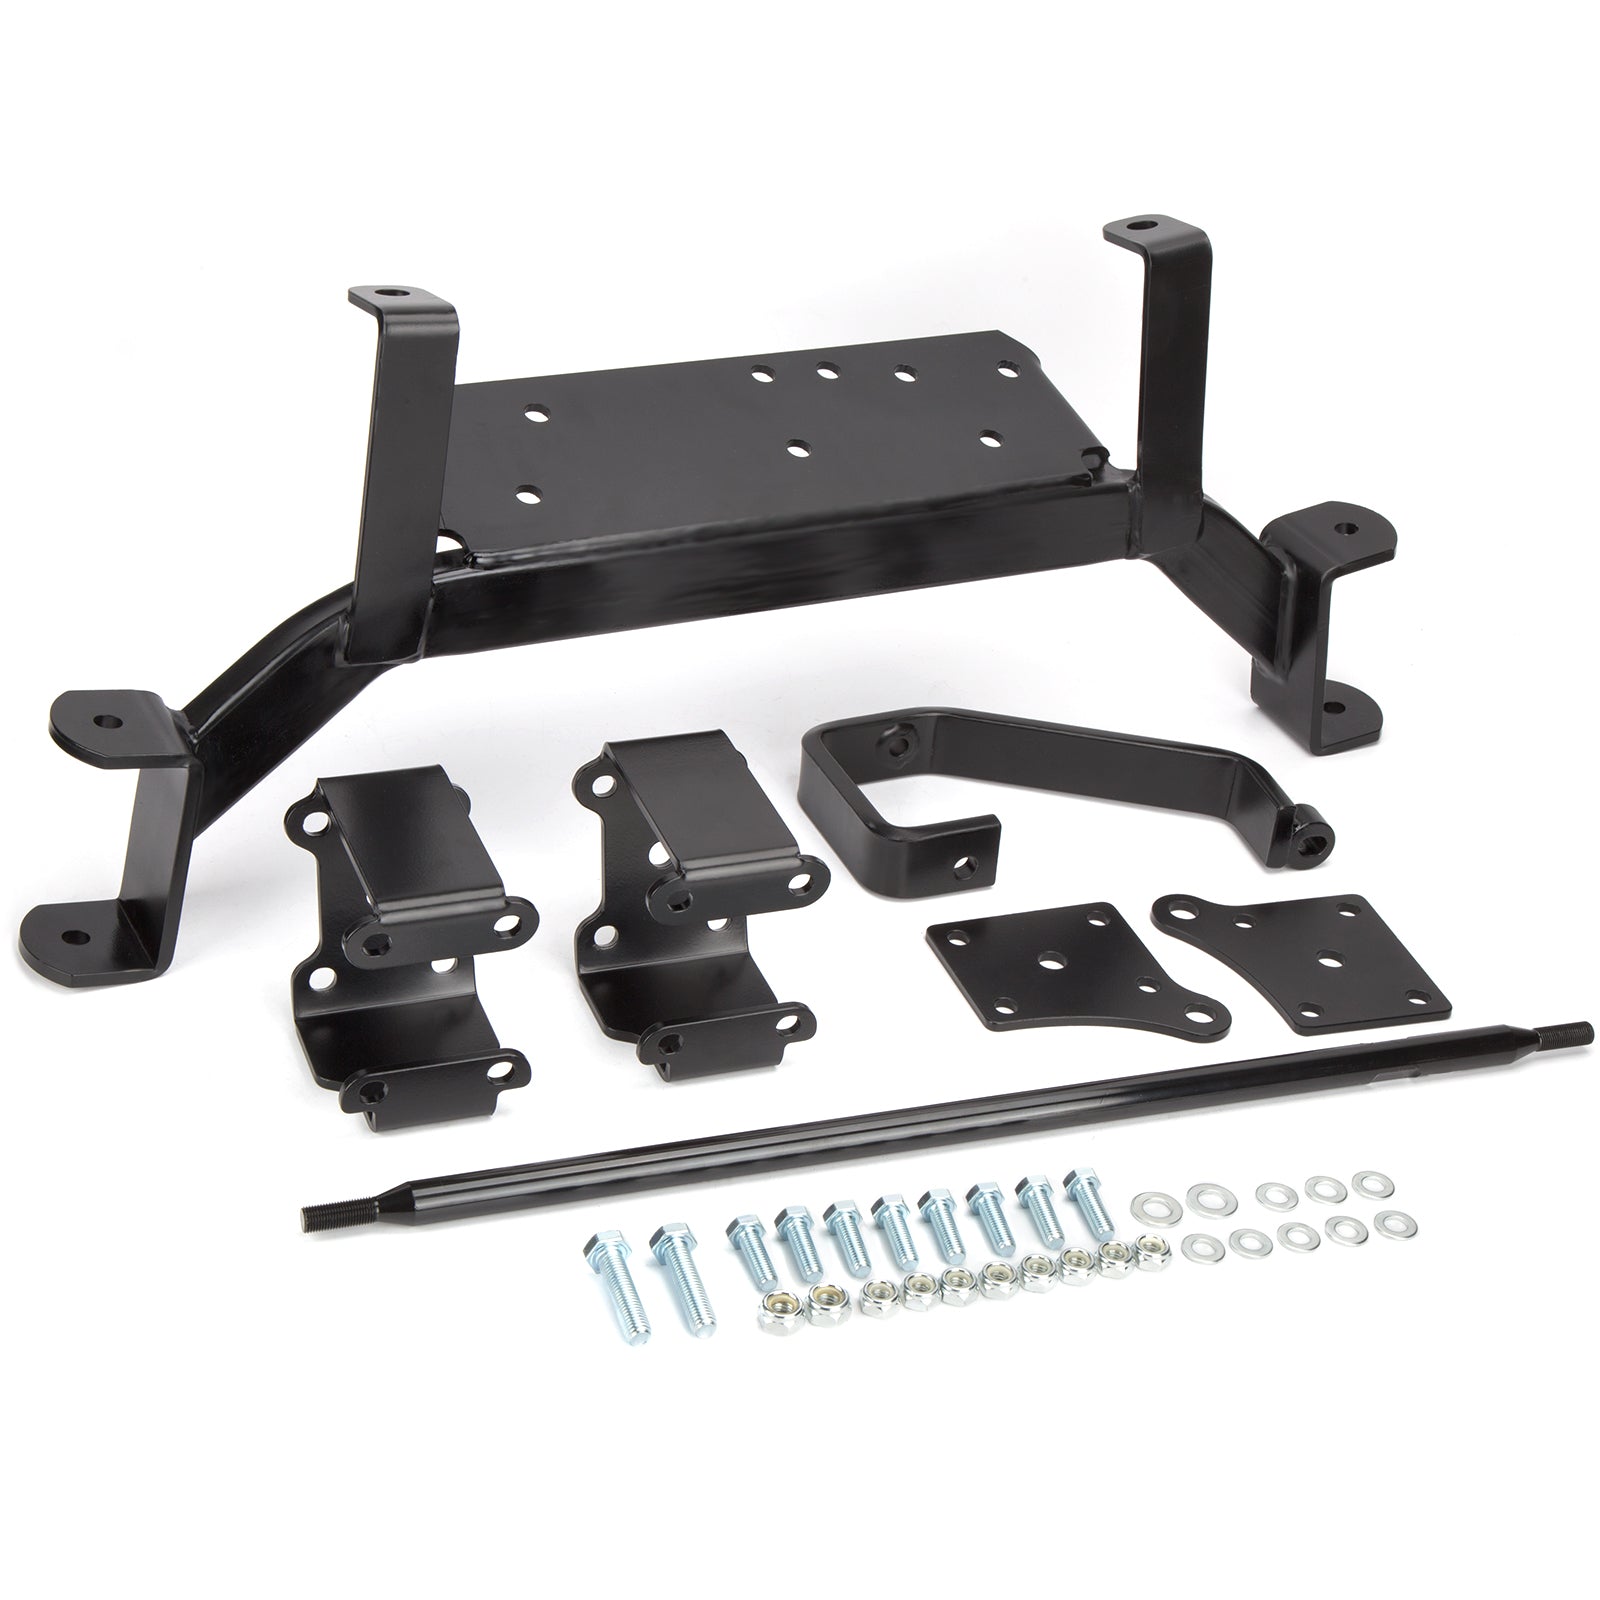 For 2001.5-2022 EZGO Golf Cart Electric TXT 6inches Drop Axle Lift Kit xccscss.